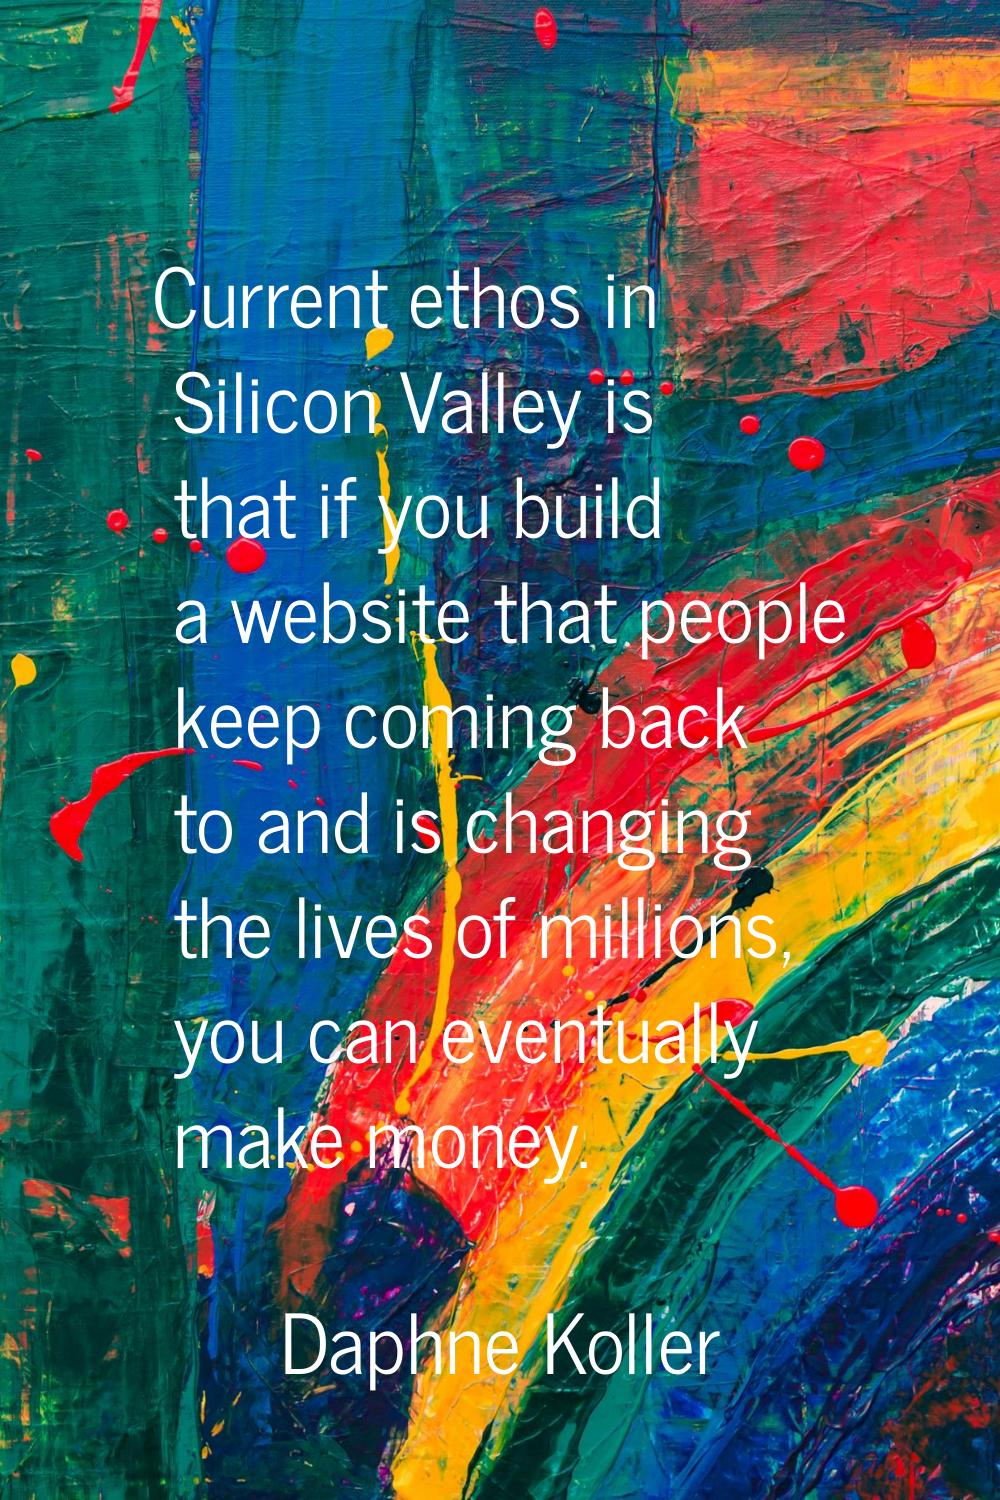 Current ethos in Silicon Valley is that if you build a website that people keep coming back to and 